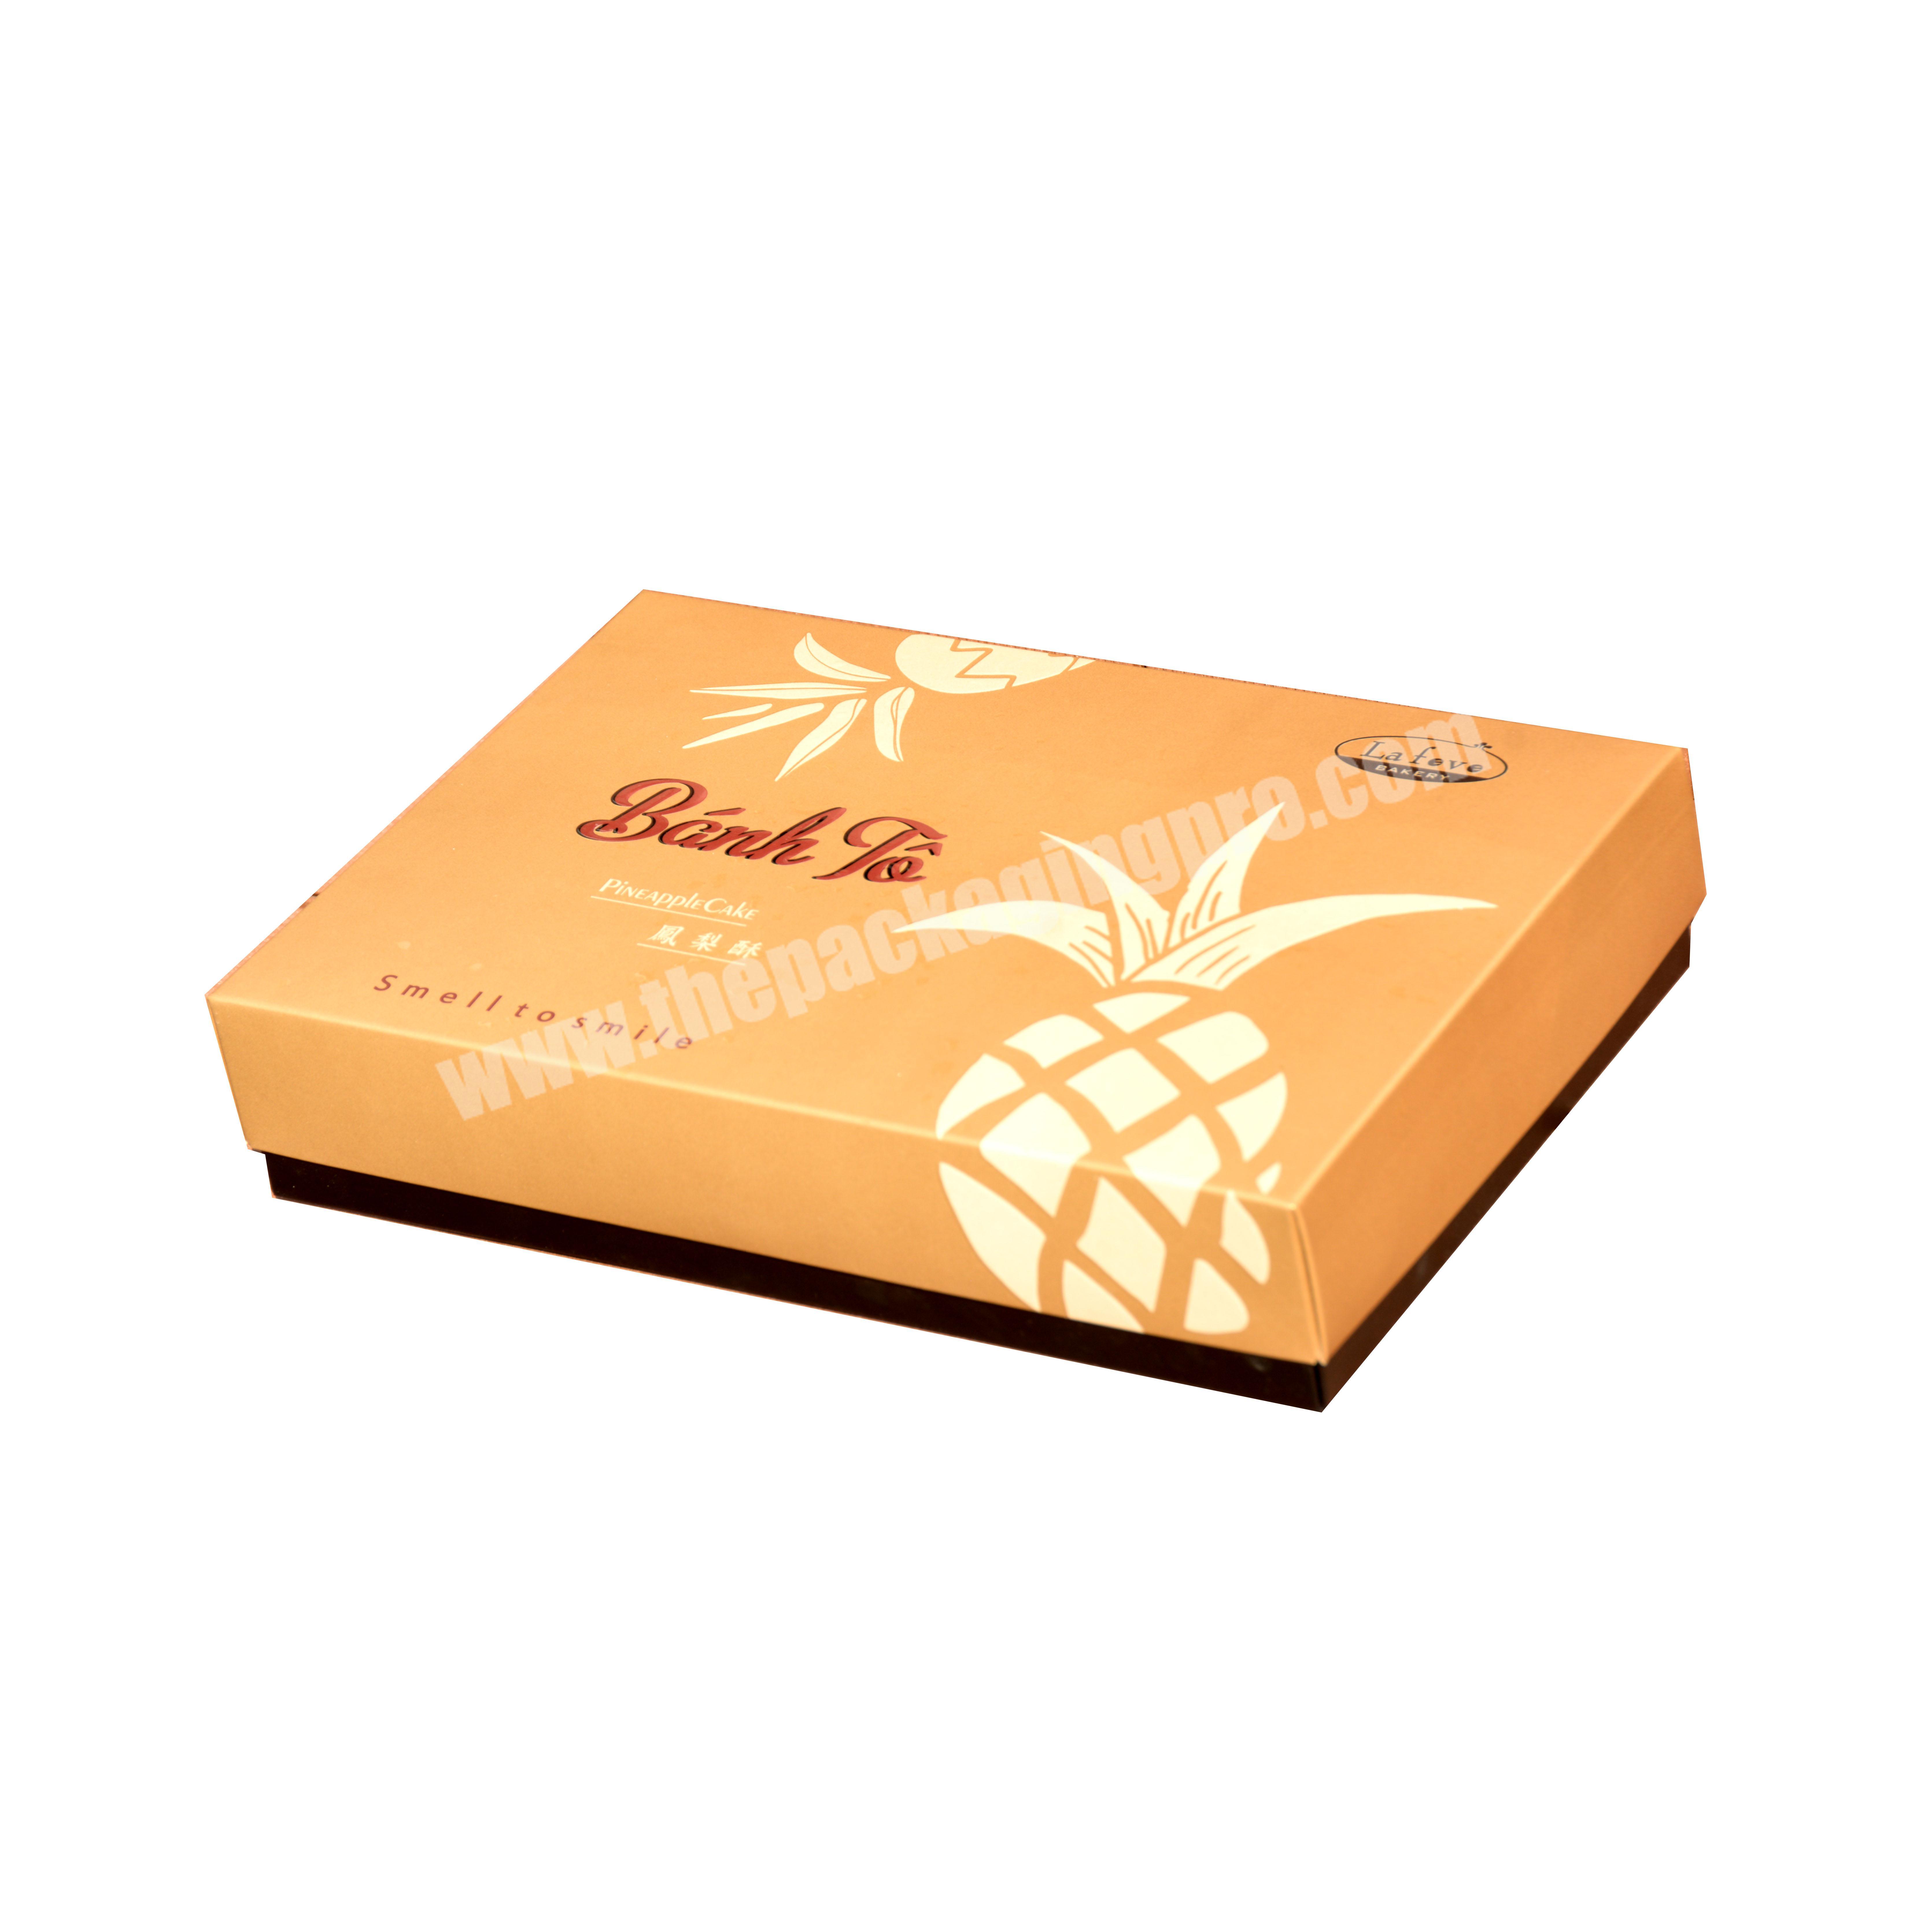 Embossing Cardboard Paper Box With Logo Displayed As Required